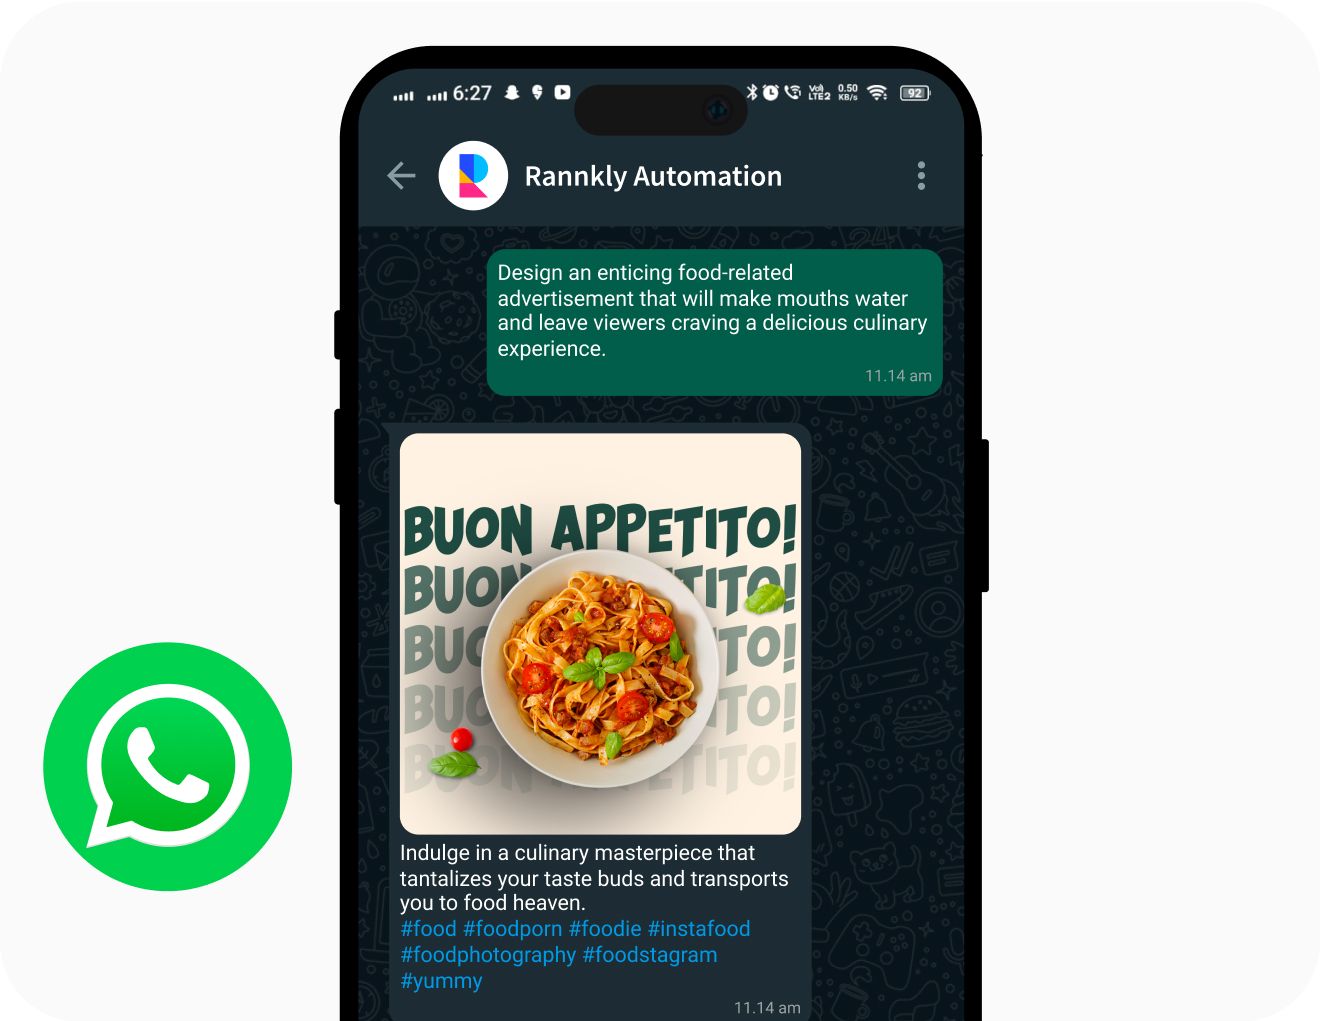 Smartphone displaying a WhatsApp message from Rannkly Automation with a food advertisement featuring pasta, aimed at enticing culinary enthusiasts.